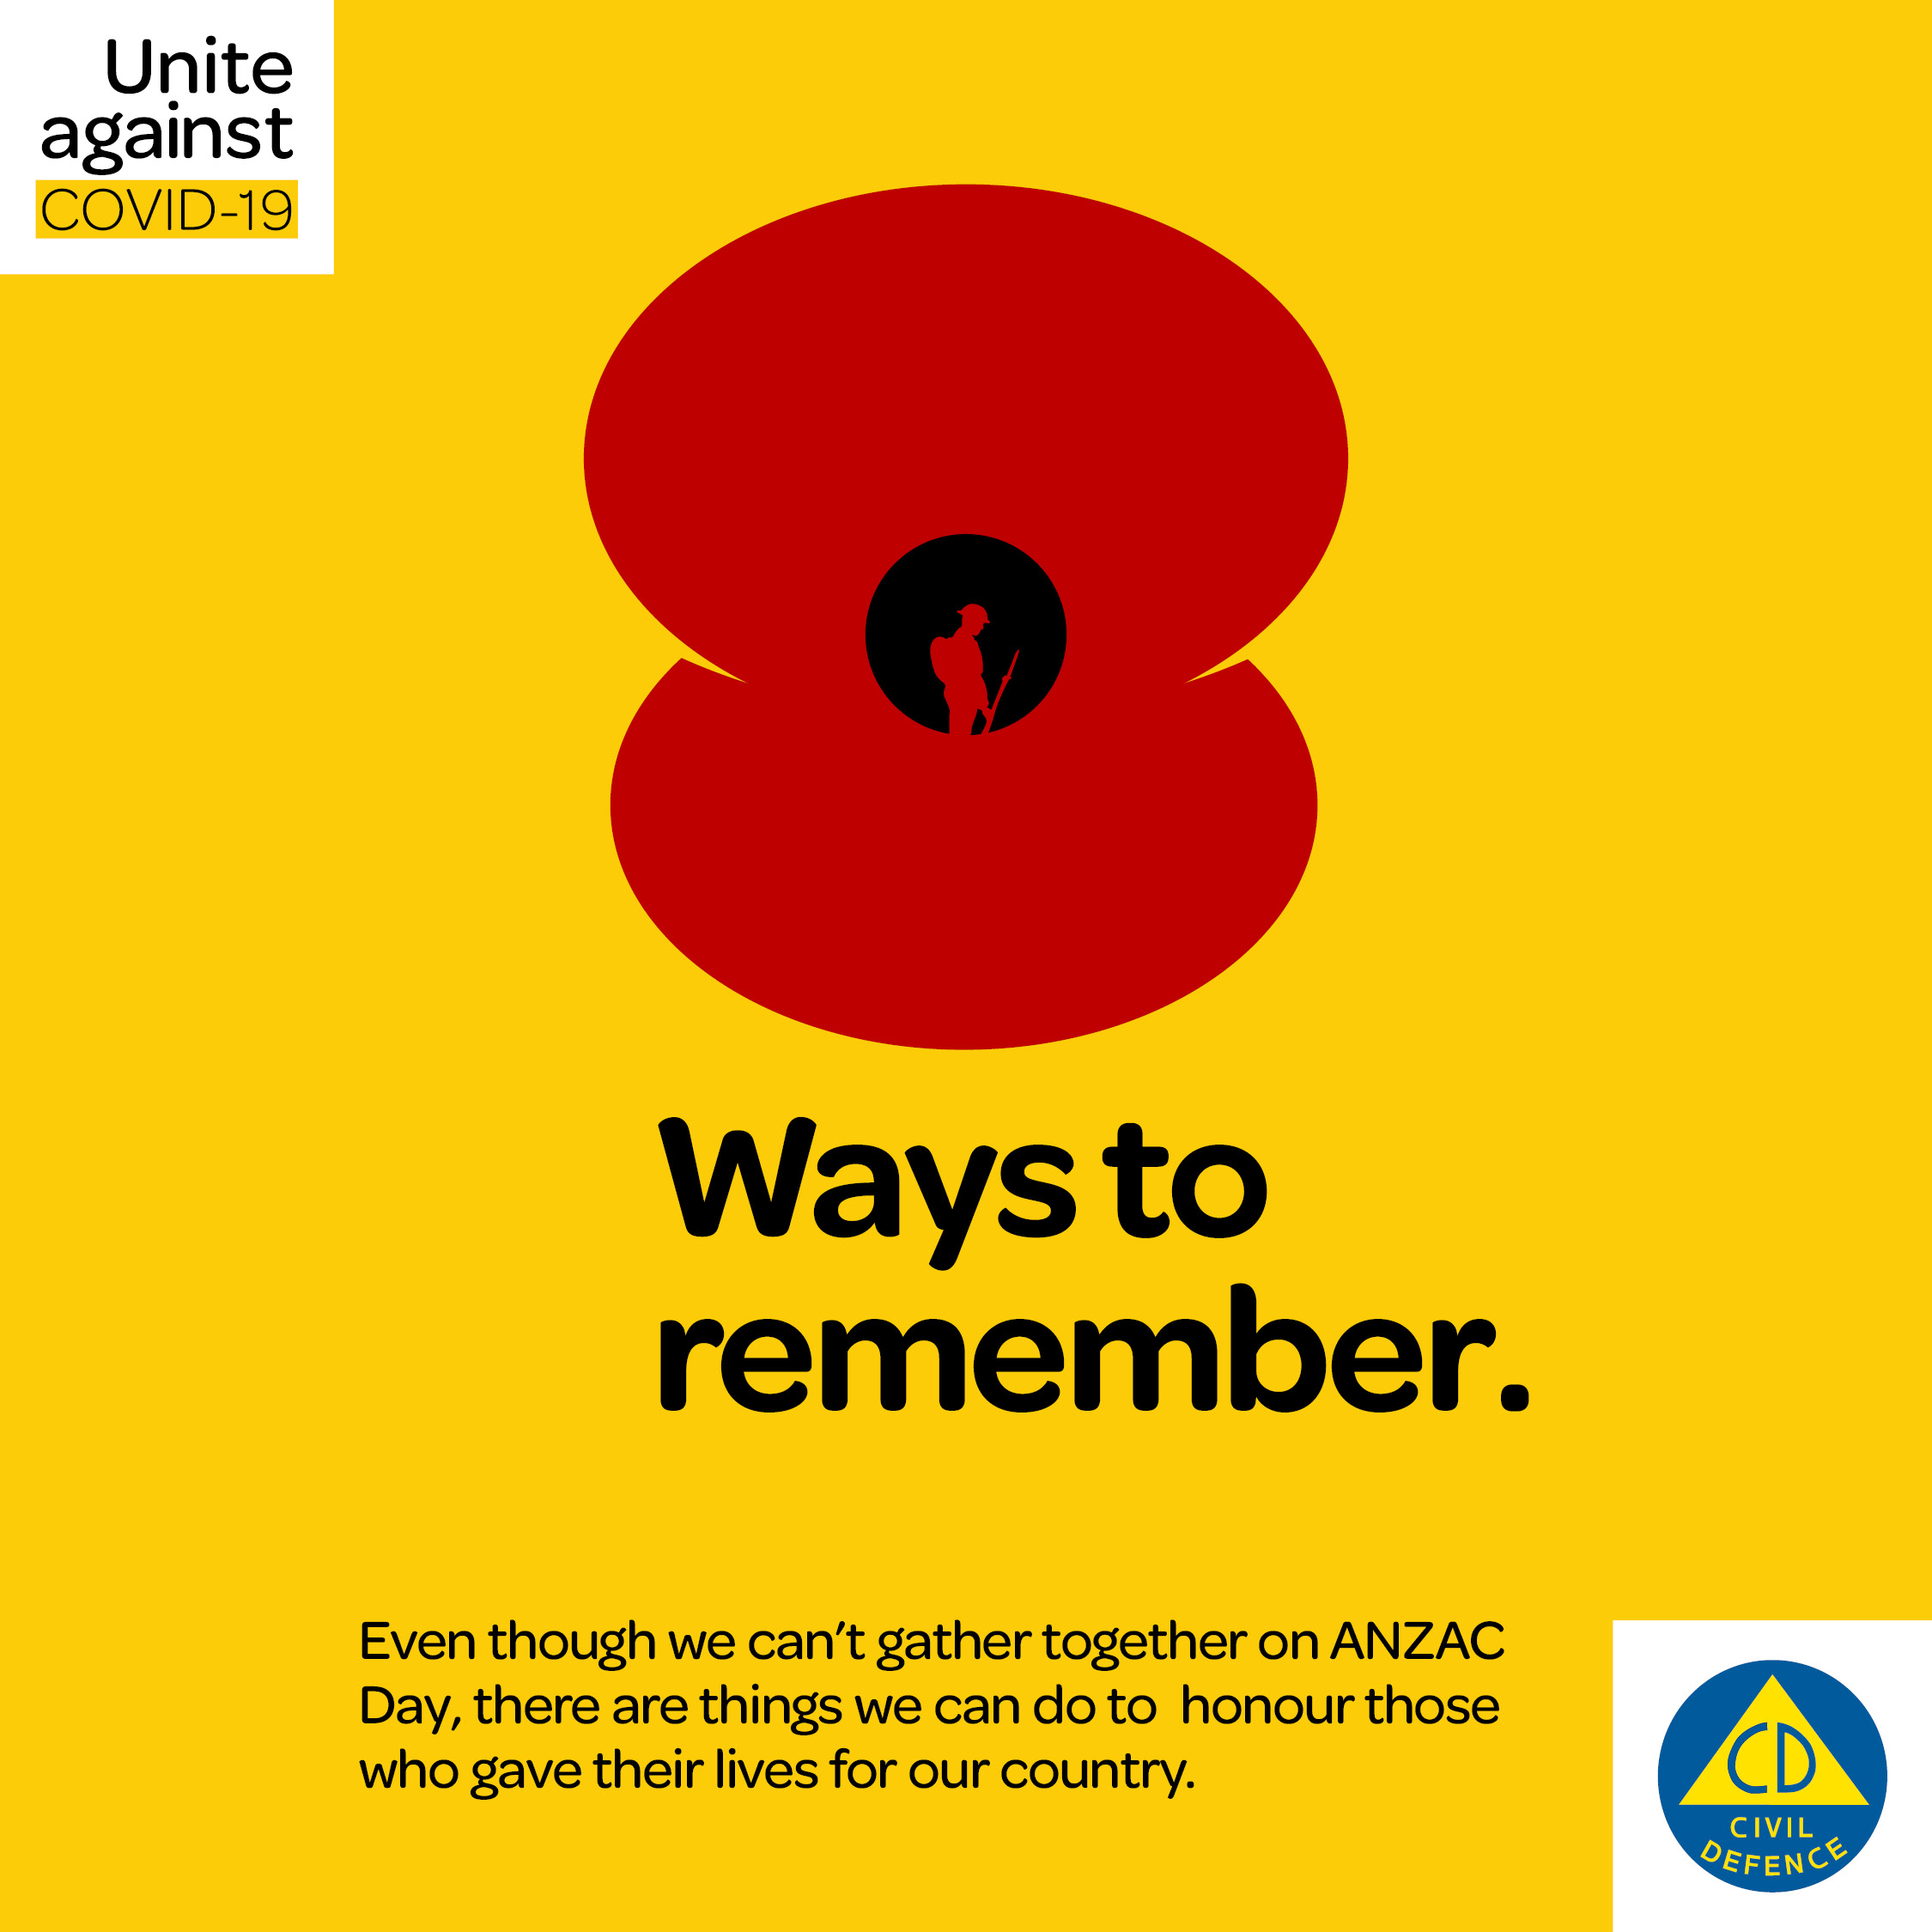 Ways to remember. Even though we can't gather together on ANZAC day there are things we can do to honour those who gave their lives for our country. #StandAtDawn.